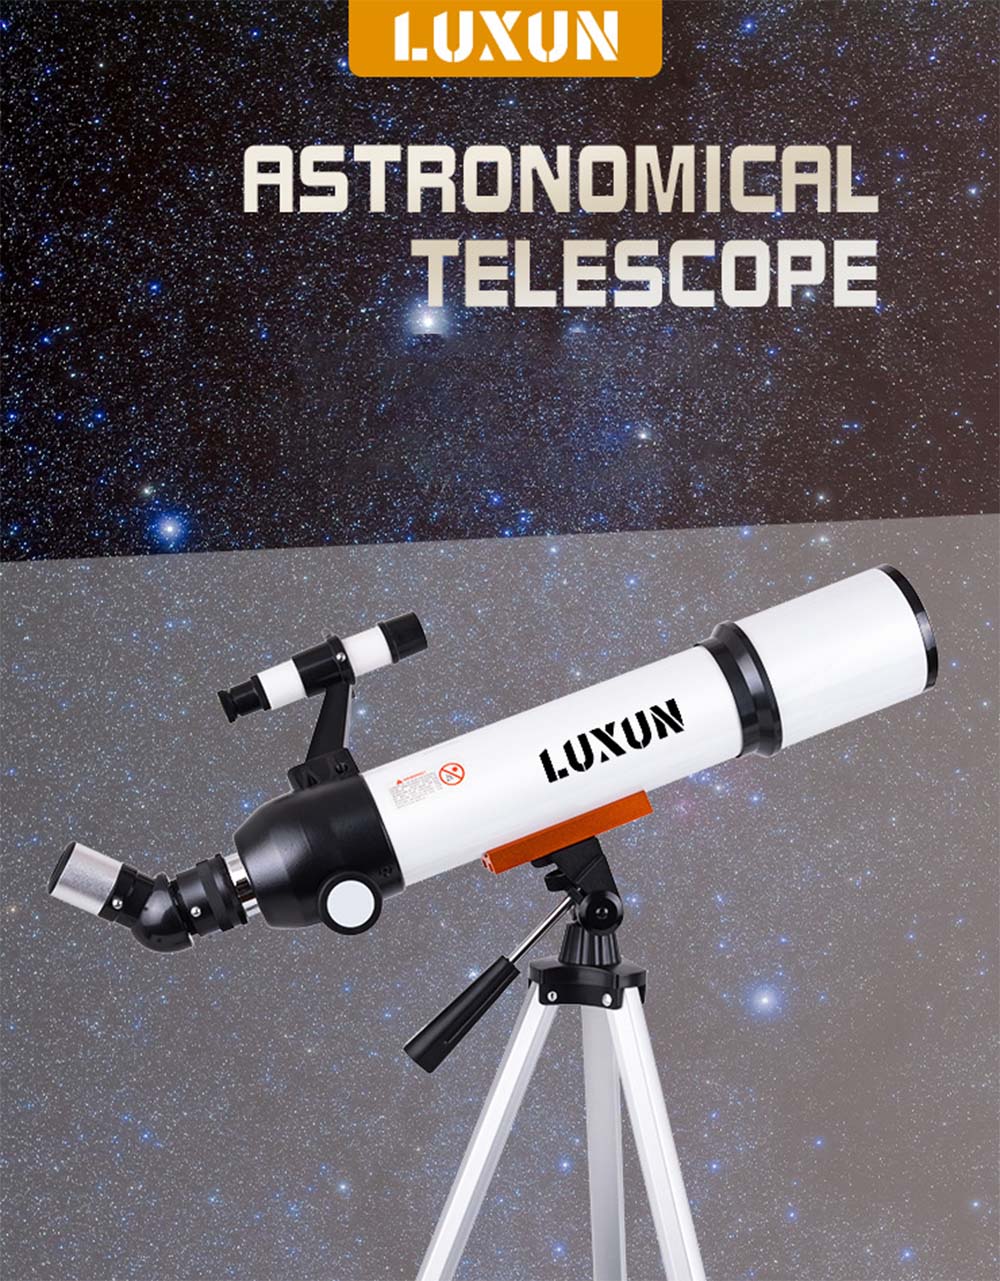 LUXUN-F50070M-HD-Refractive-Astronomical-Telescope-Zoom-Monocular-Space-Spotting-High-Magnification--1931170-1